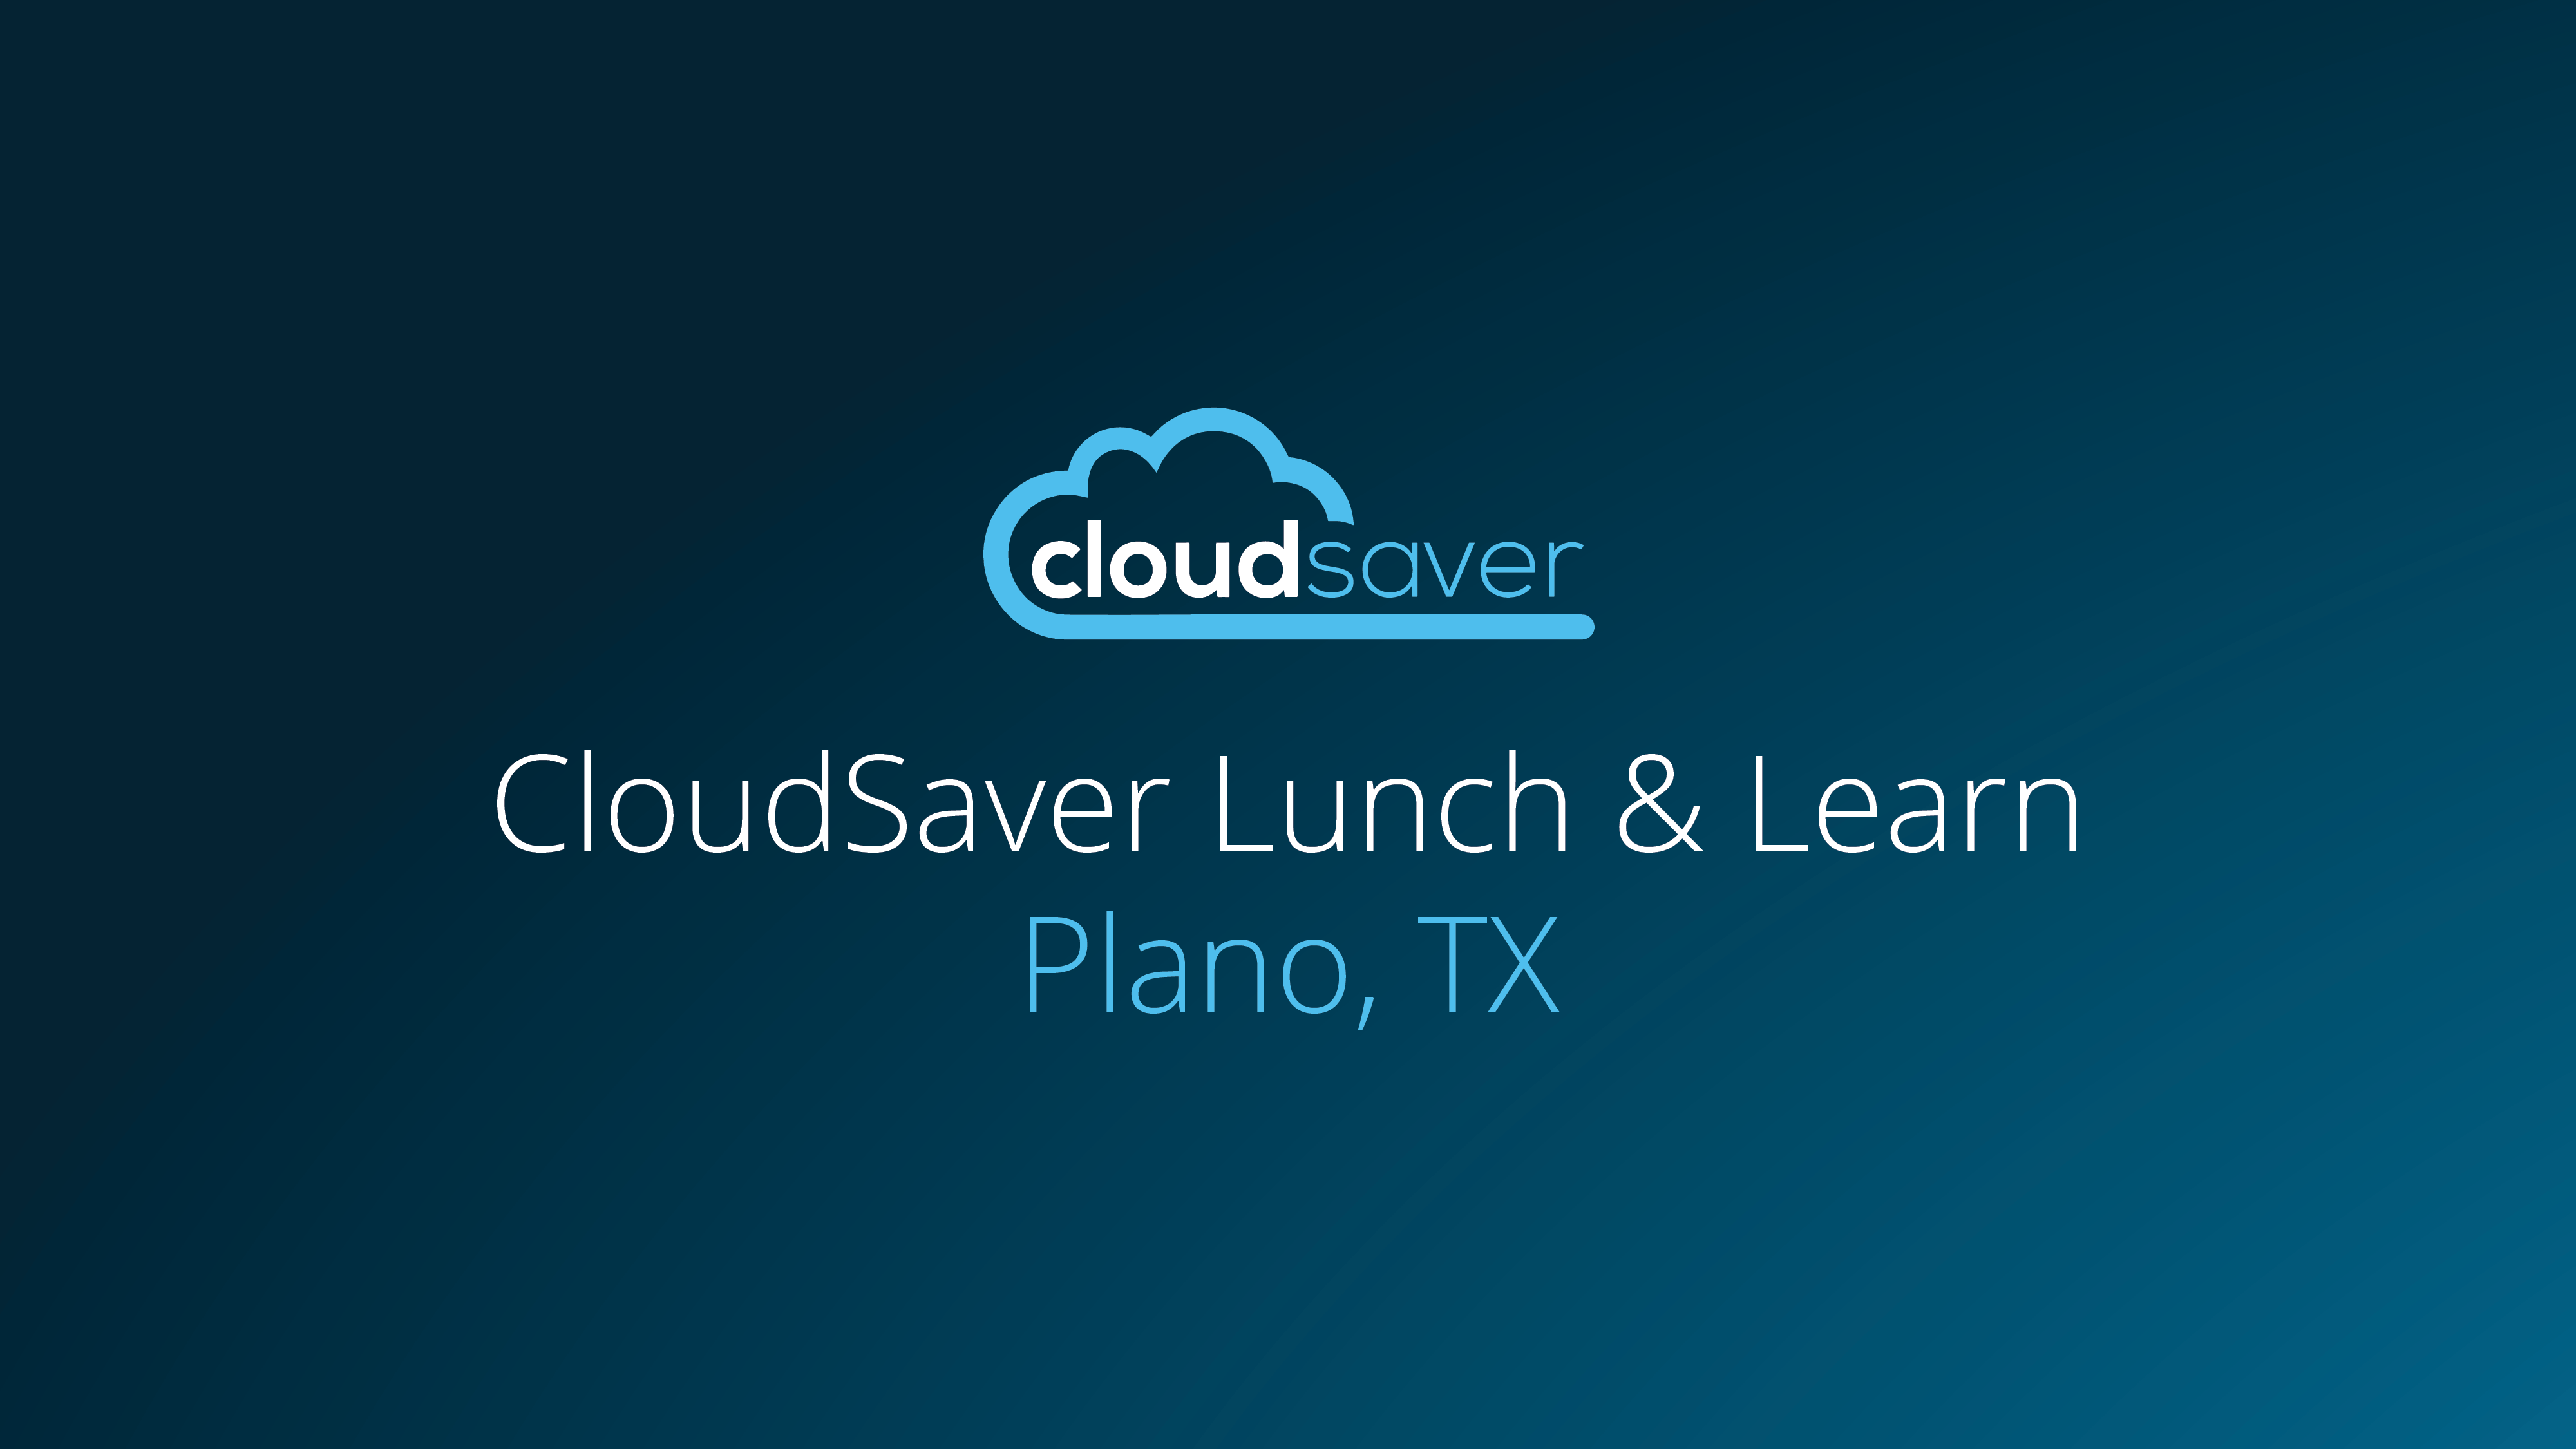 Lunch & Learn - Plano, TX